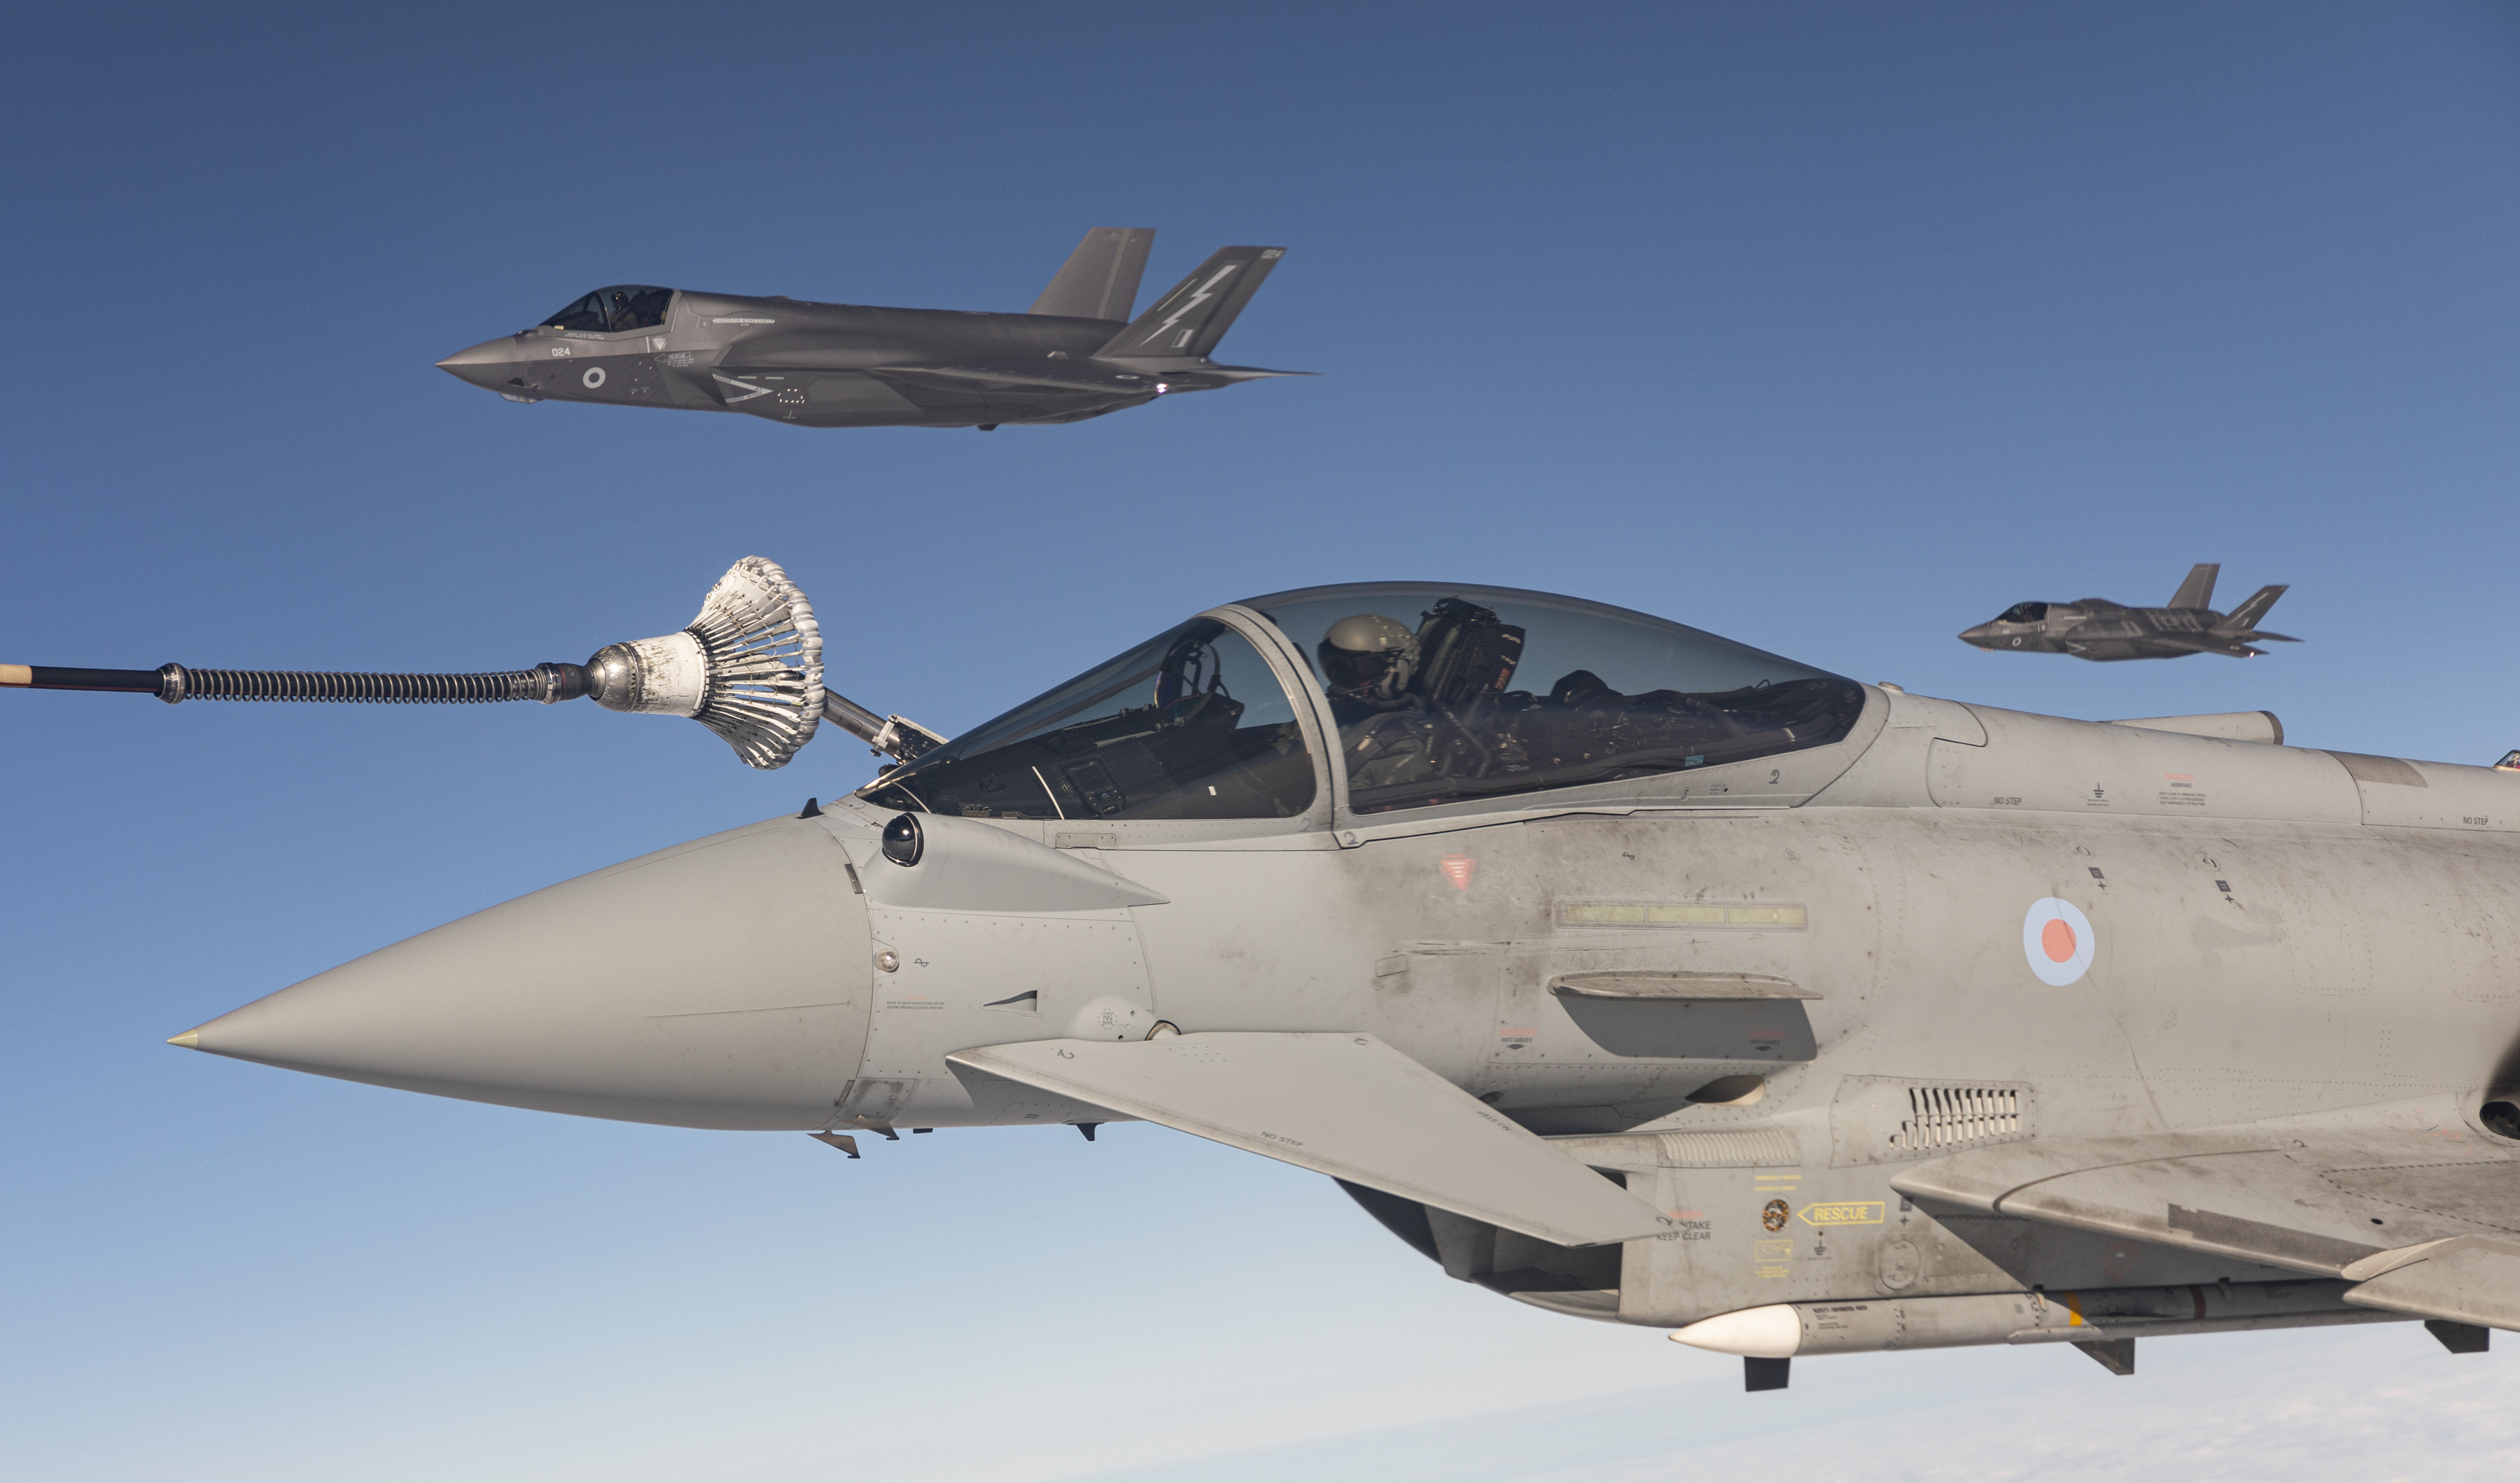 Fighter jets during air-to-air refuelling.